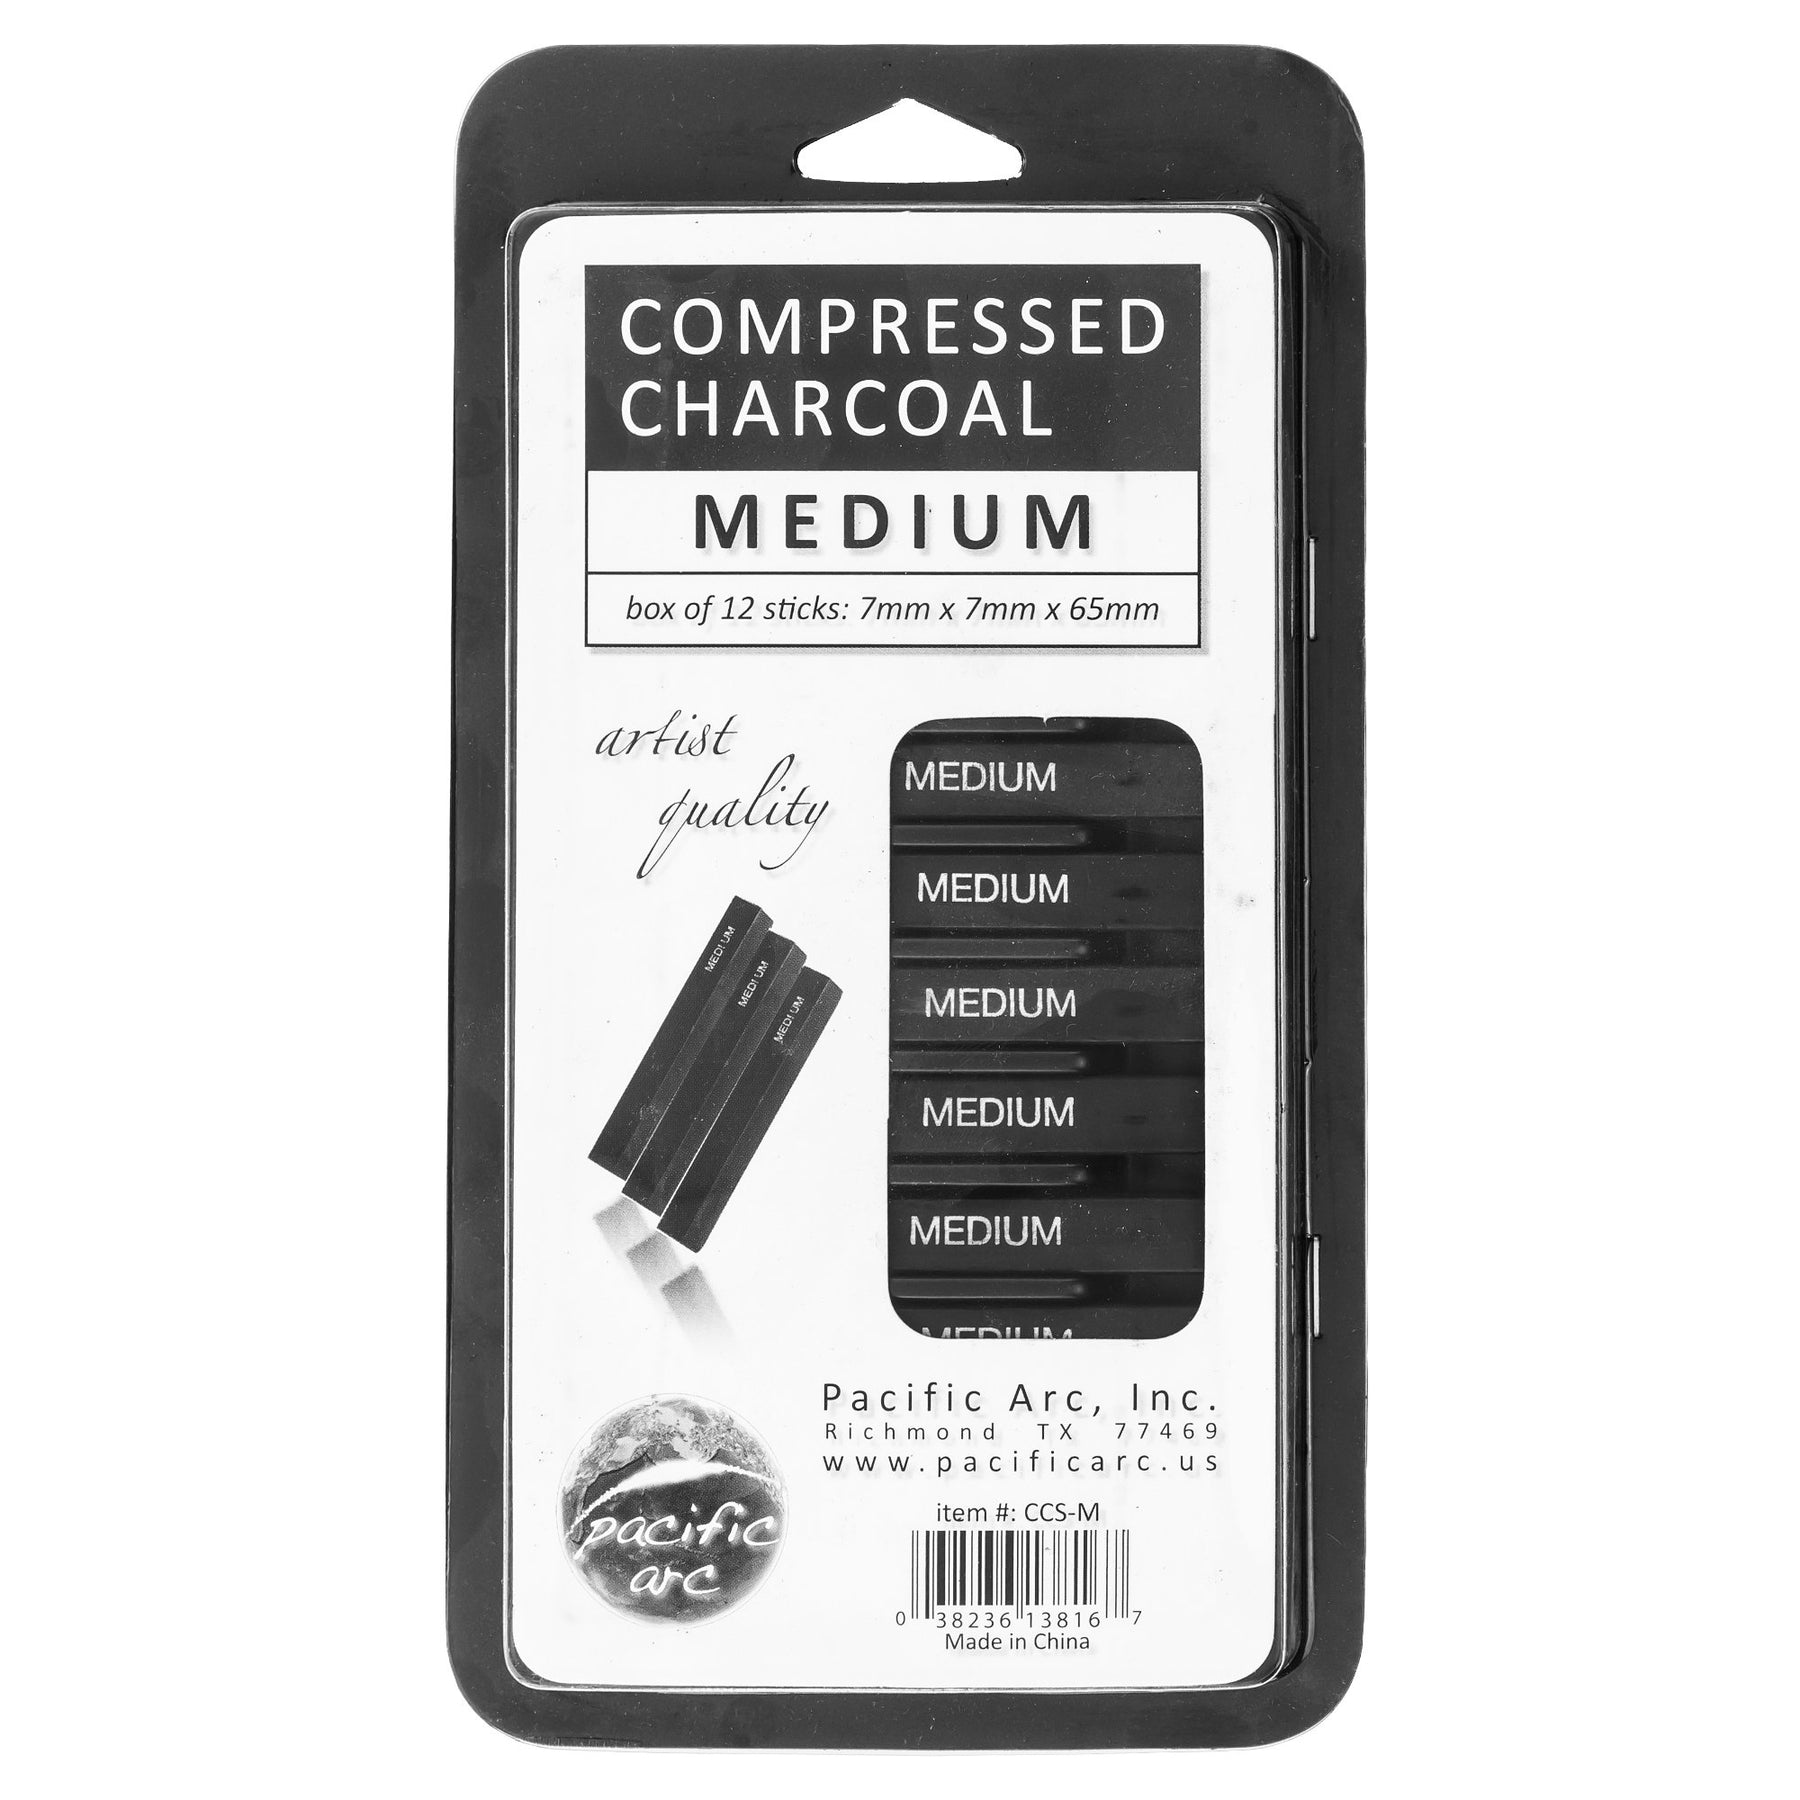 Compressed Charcoal Sticks Soft 12 Pack for Drawing, Sketching, and Shading